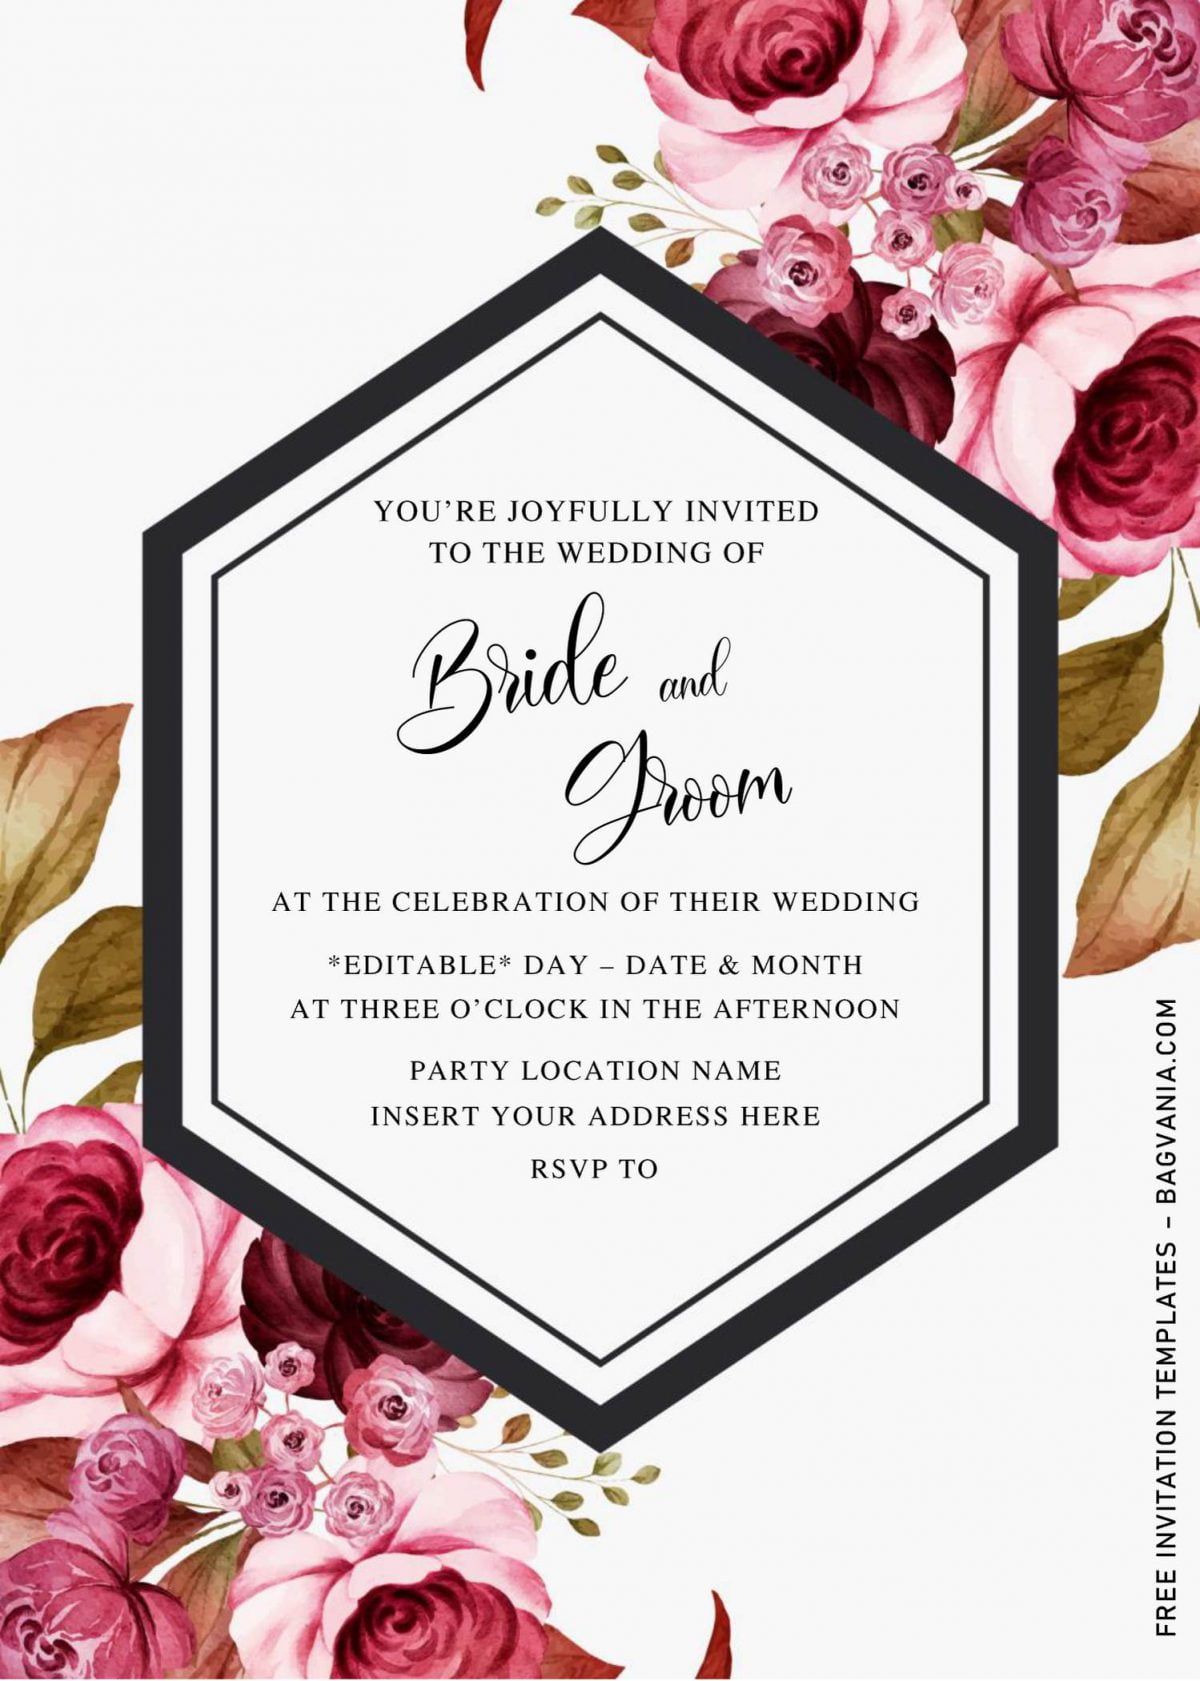 Free Burgundy Floral Wedding Invitation Templates For Word and has solid white background